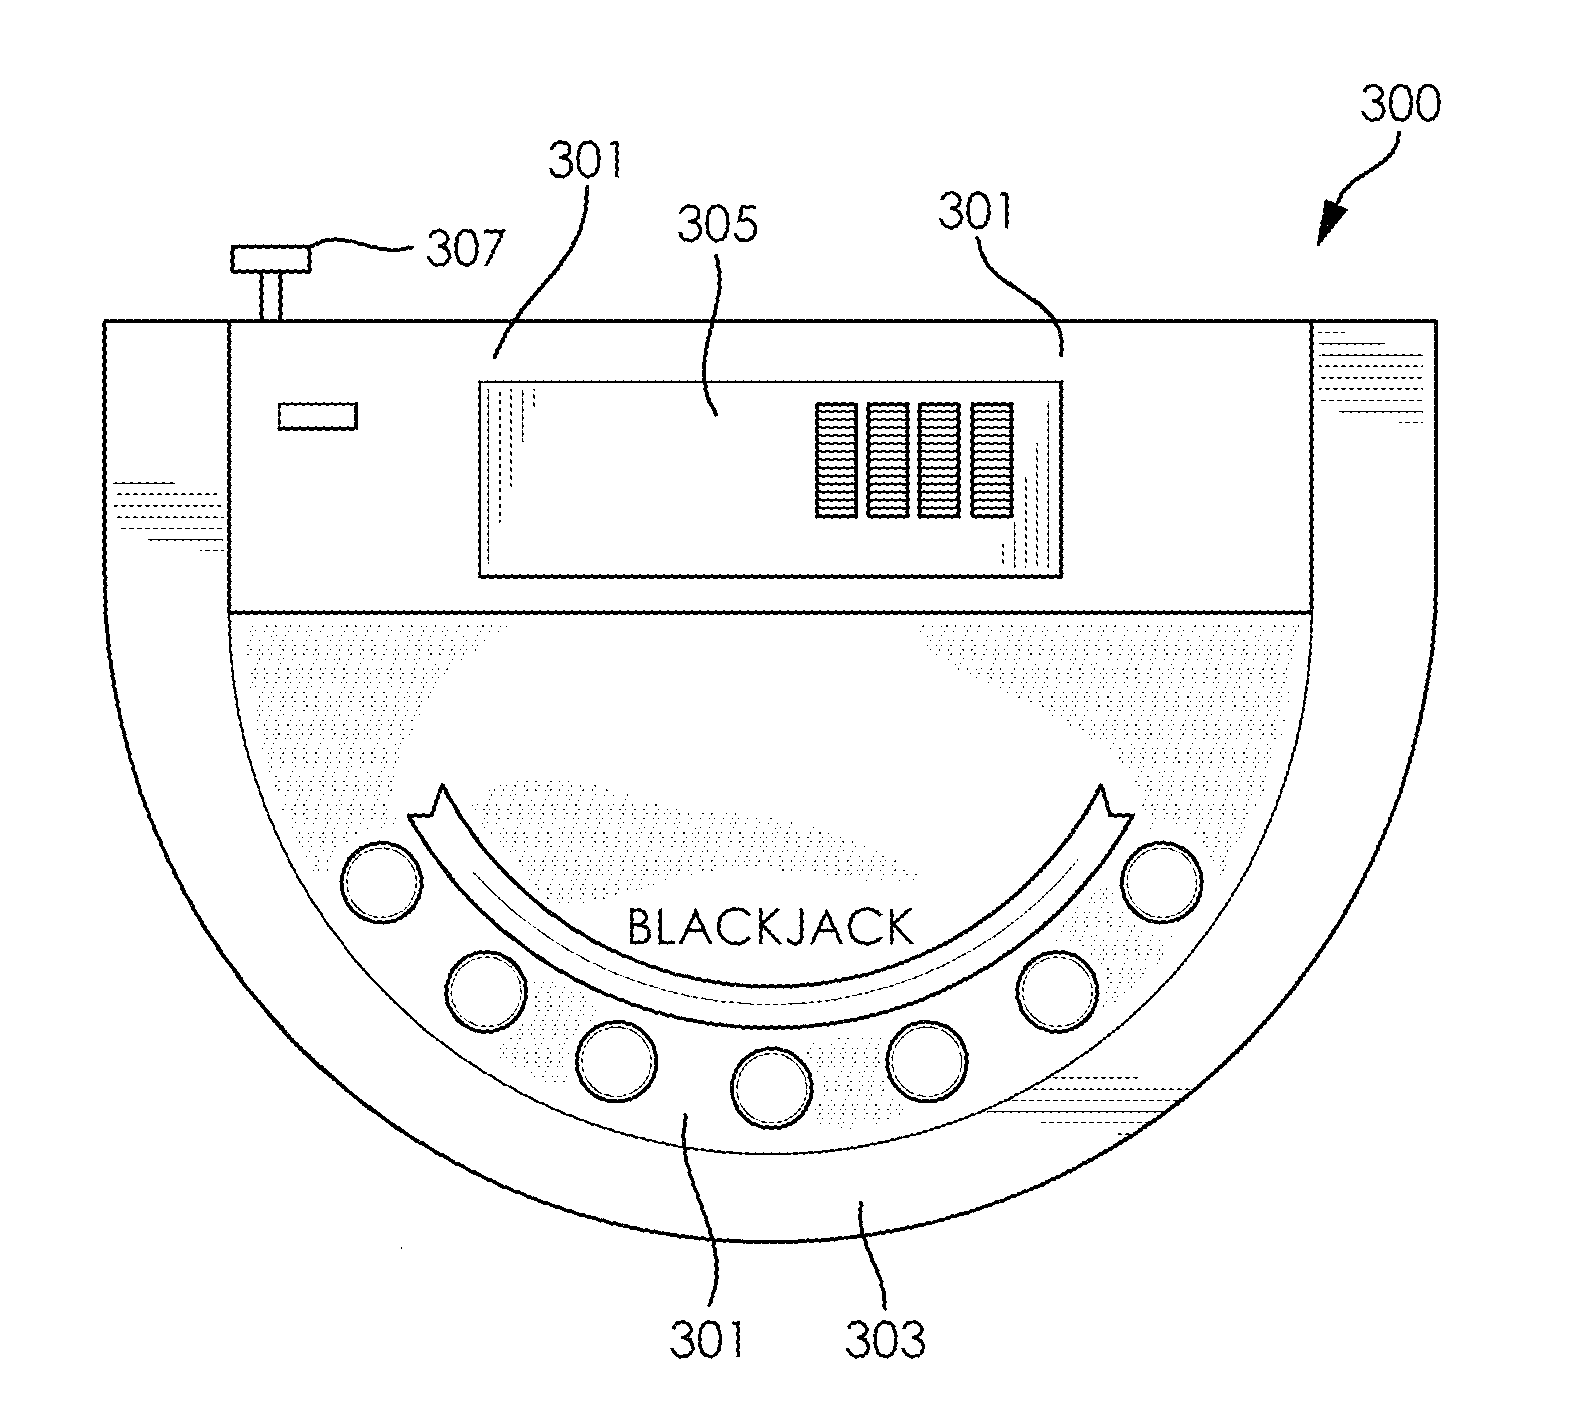 Interchangeable gaming layout powered by a display element